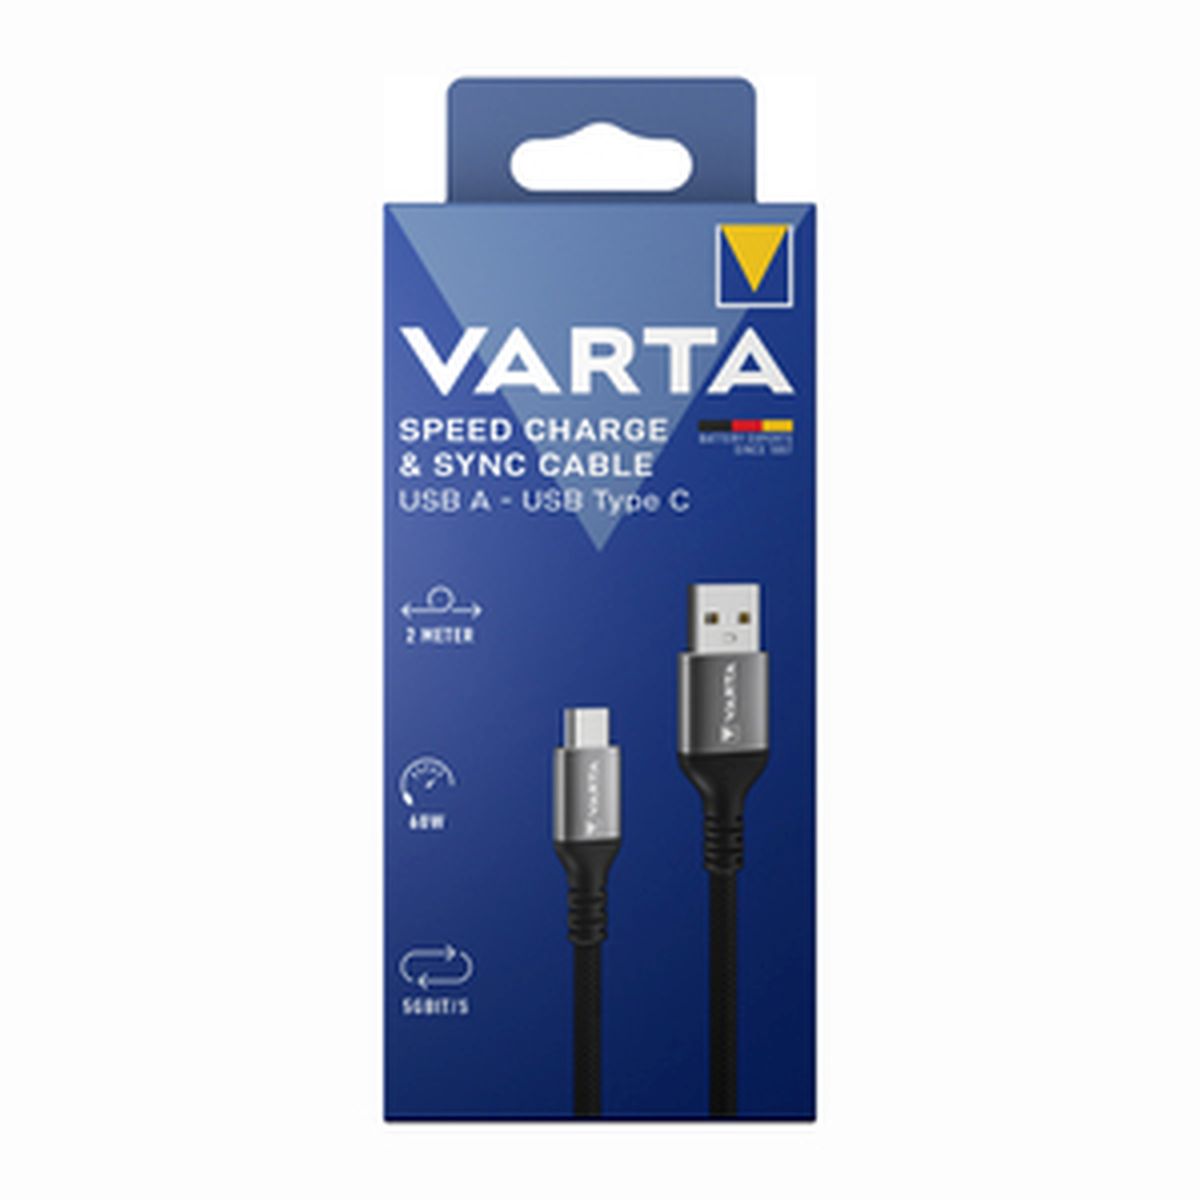 Varta USB Type A to Type C Speed Charge & Sync Cable